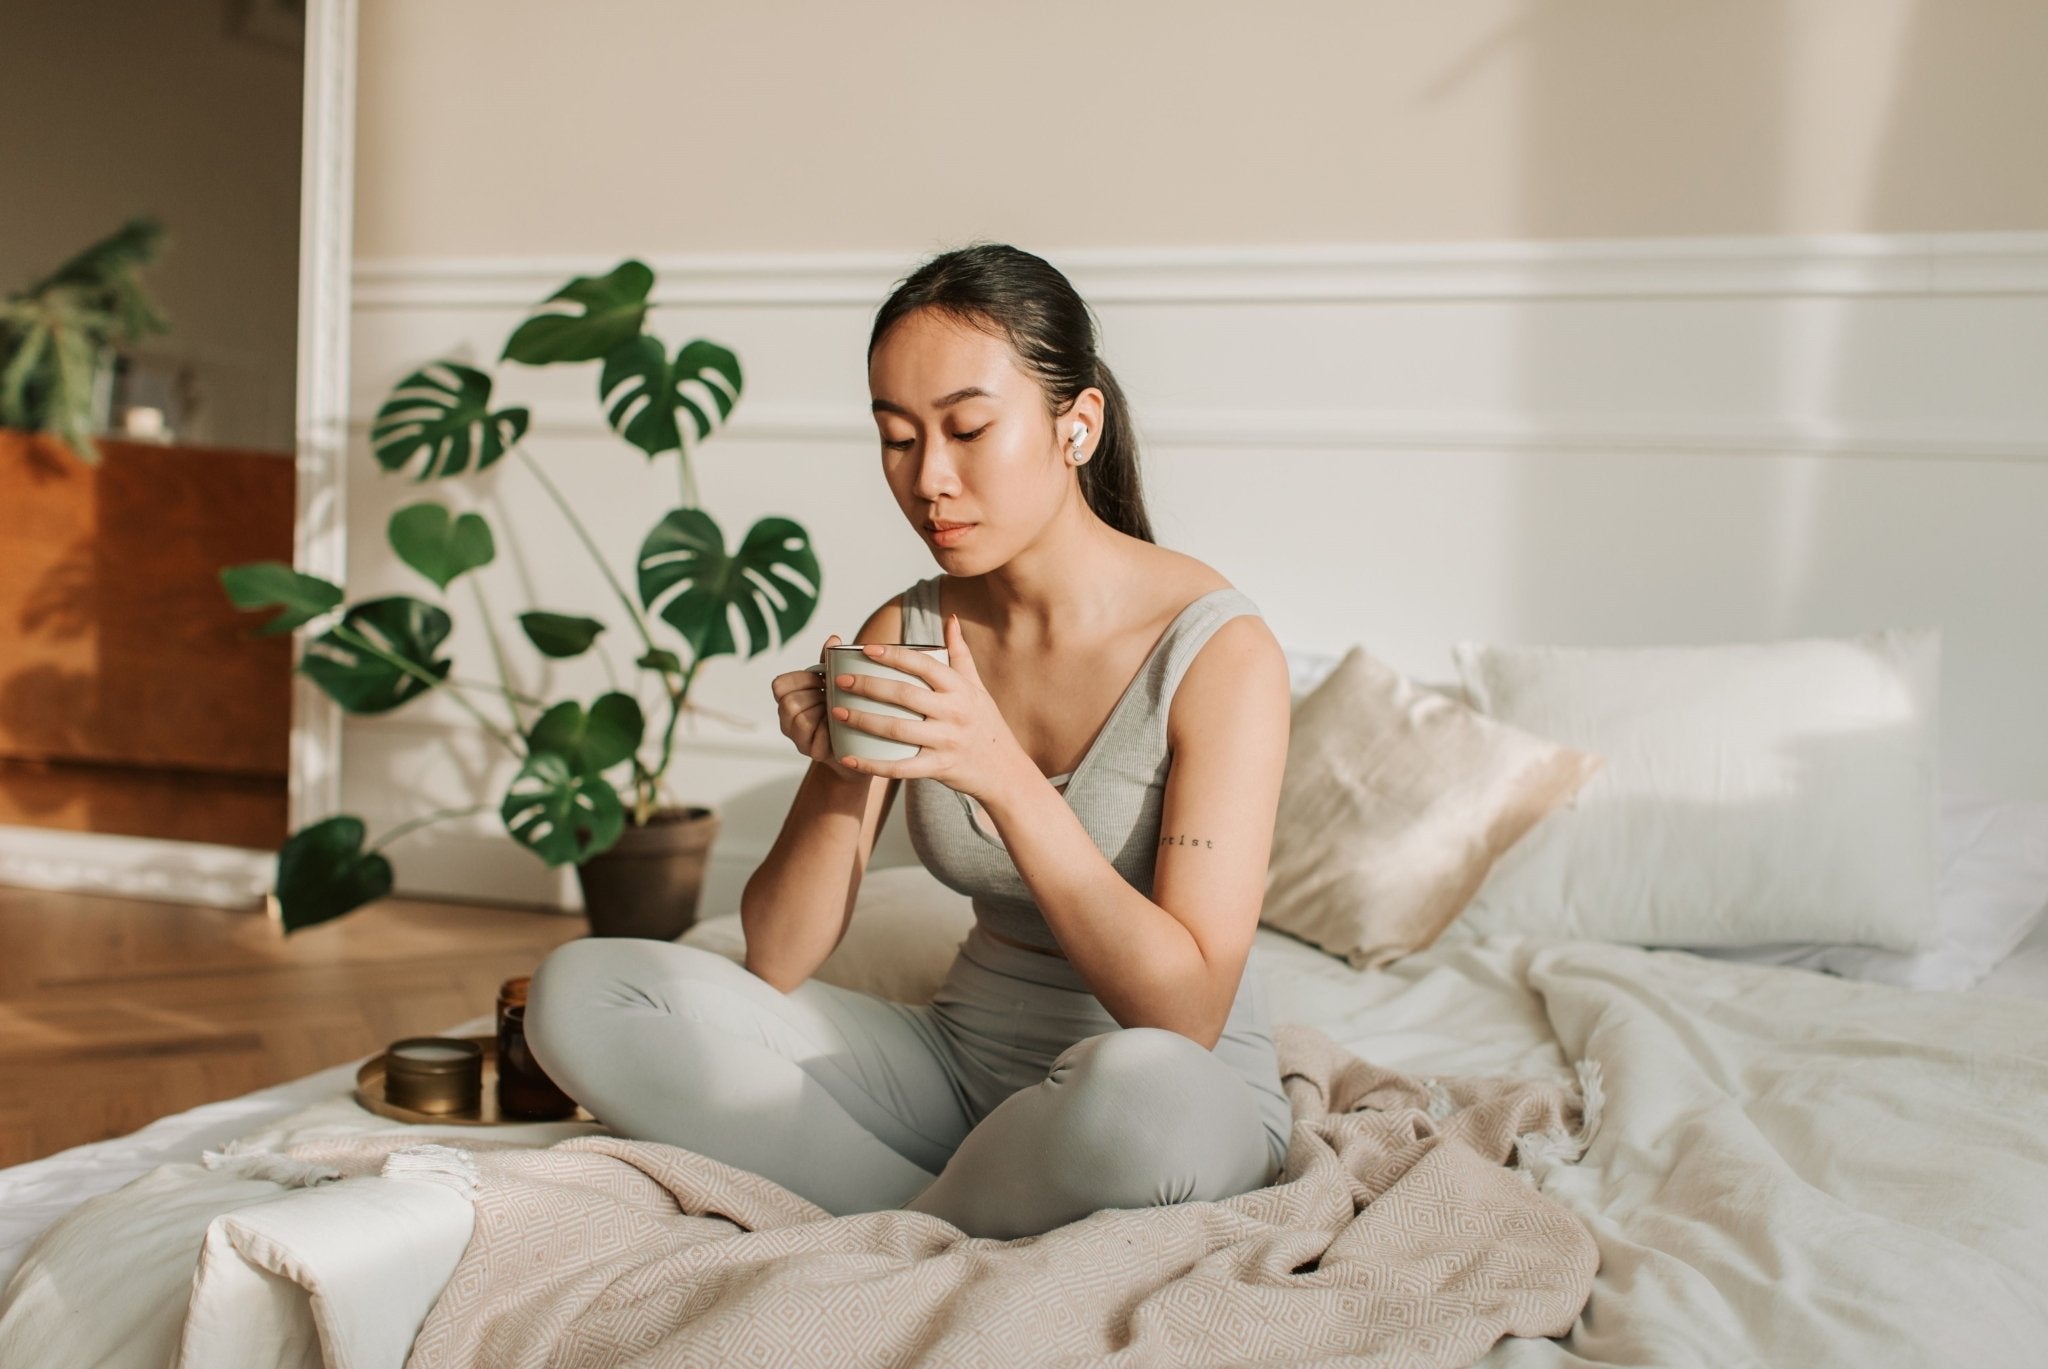 5 Wellness Practices & Rituals for a Self-Care Sunday